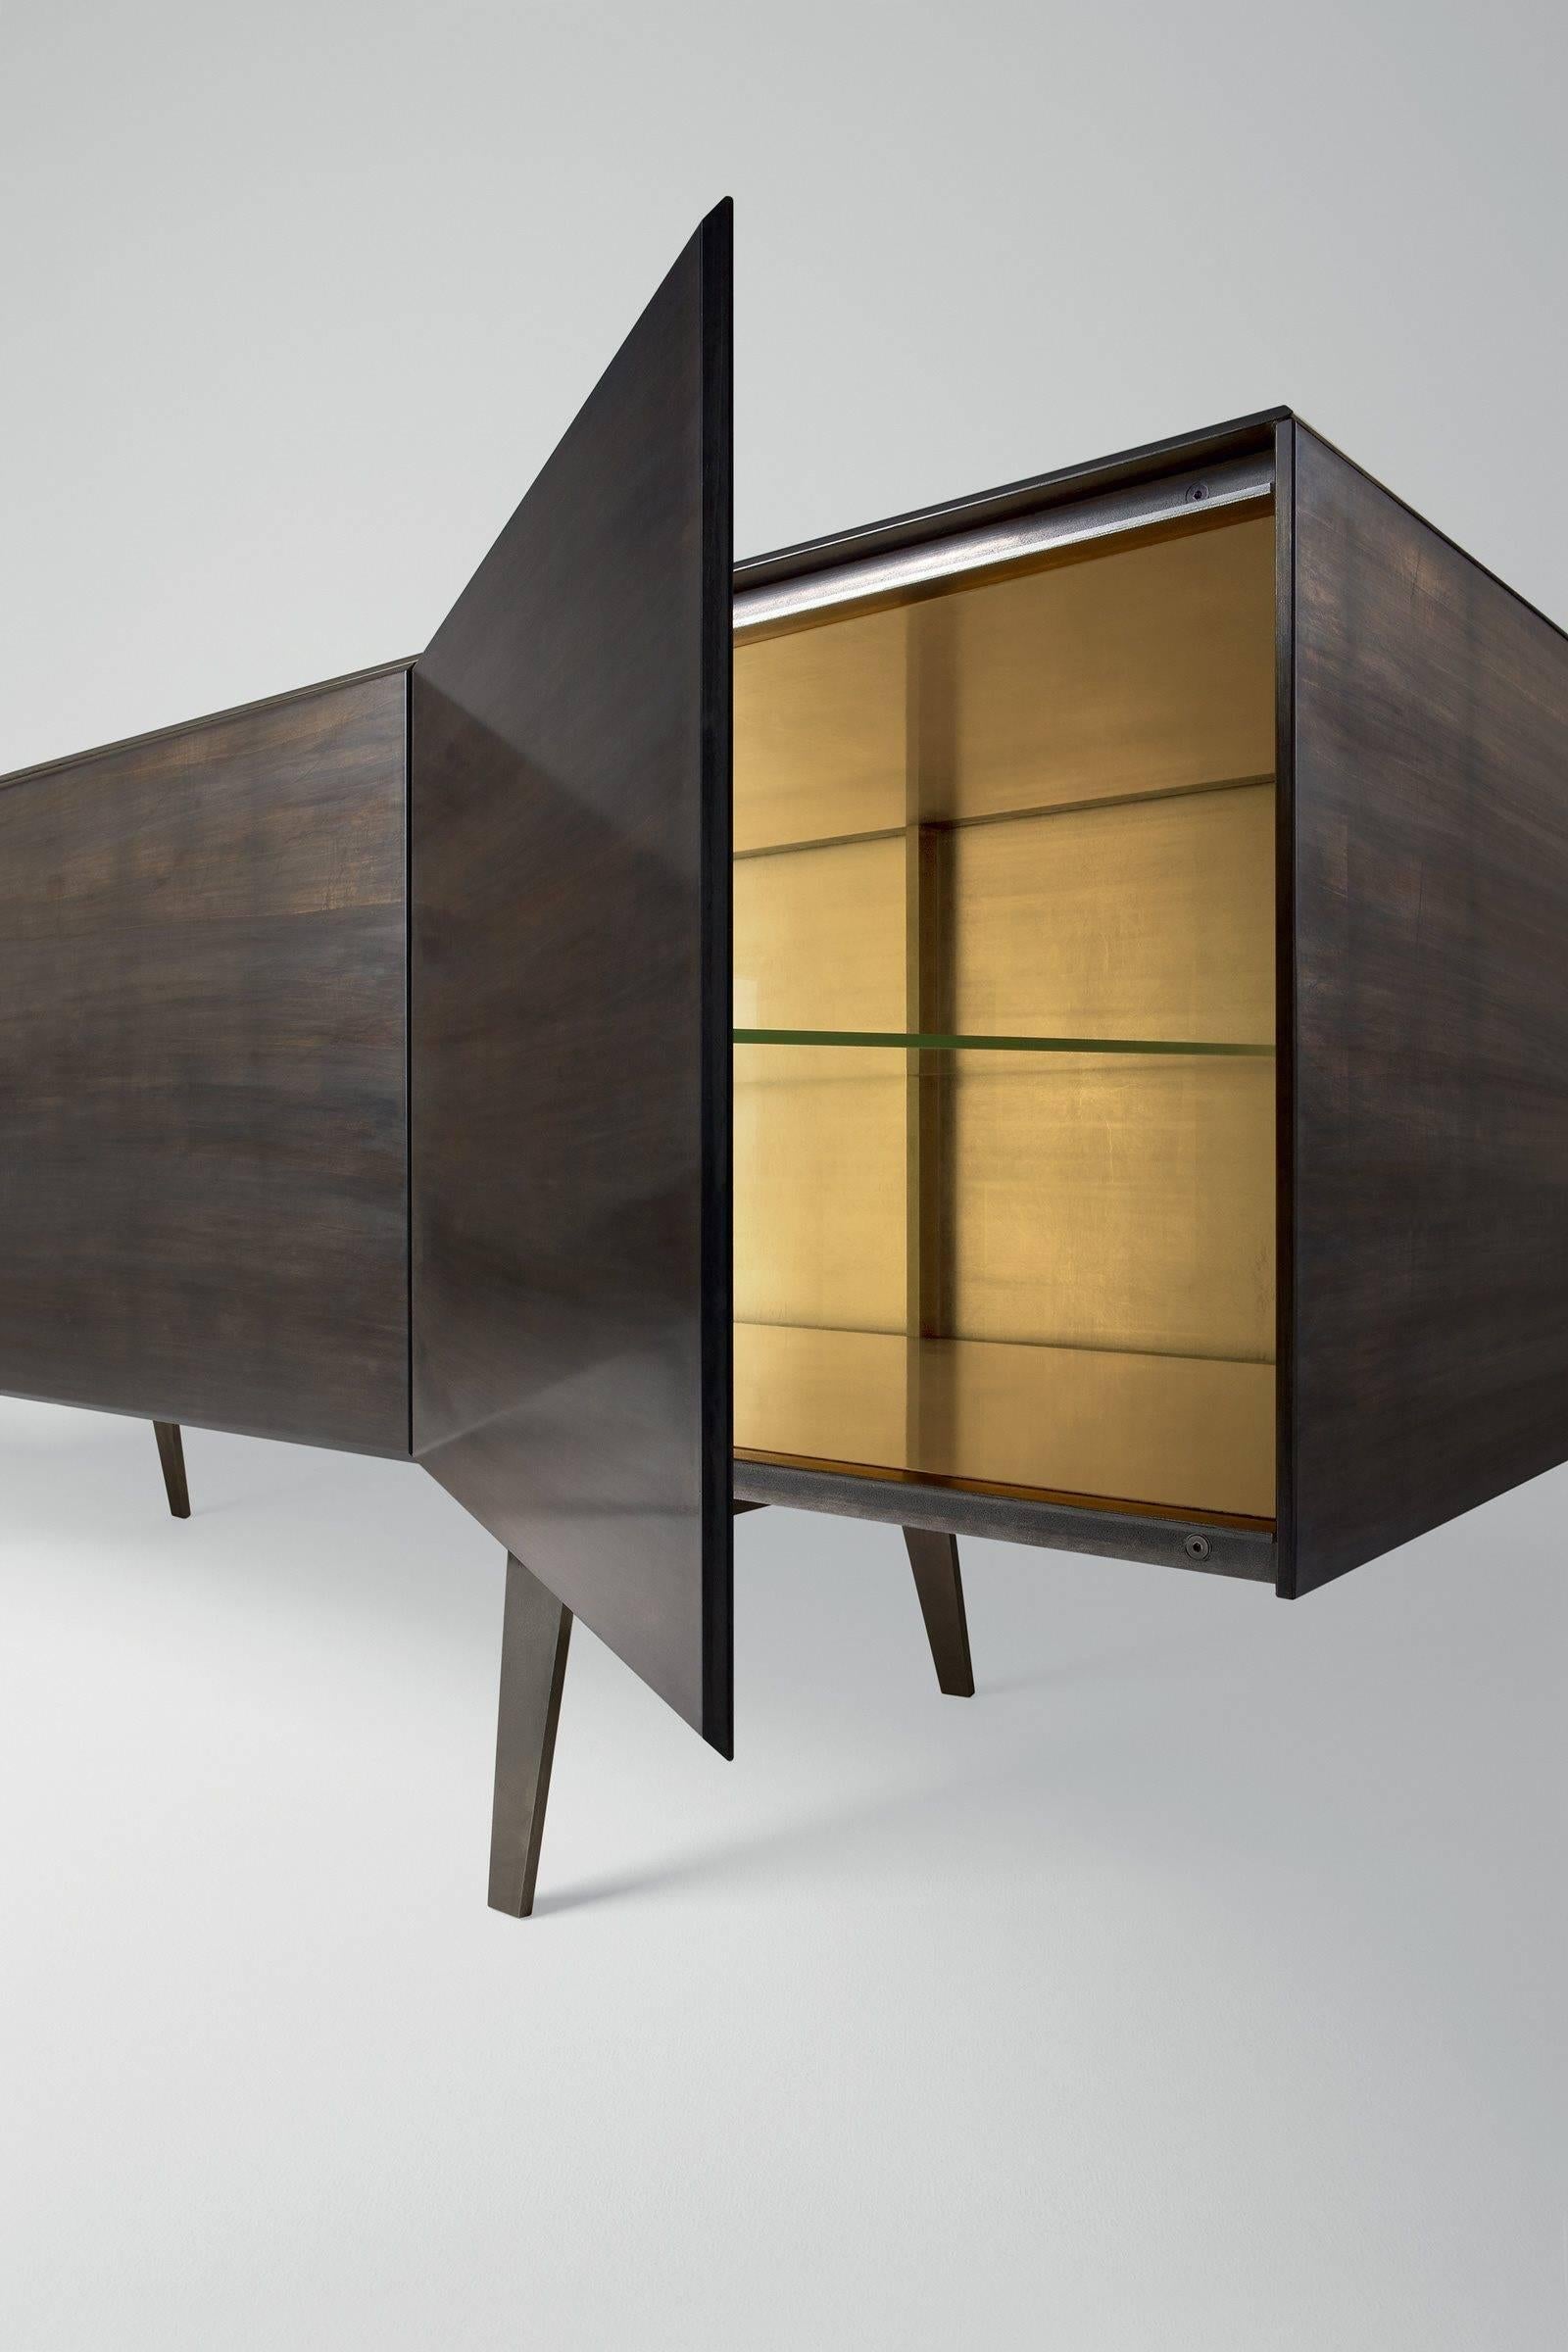 Sideboard in 8 mm tempered glass covered by gold leaf applied by hand with an exclusive system. 
Thanks to this process the unit has an irregular and unique finish outside and a gold finish inside. 
Metal structure lacquered bronze color with